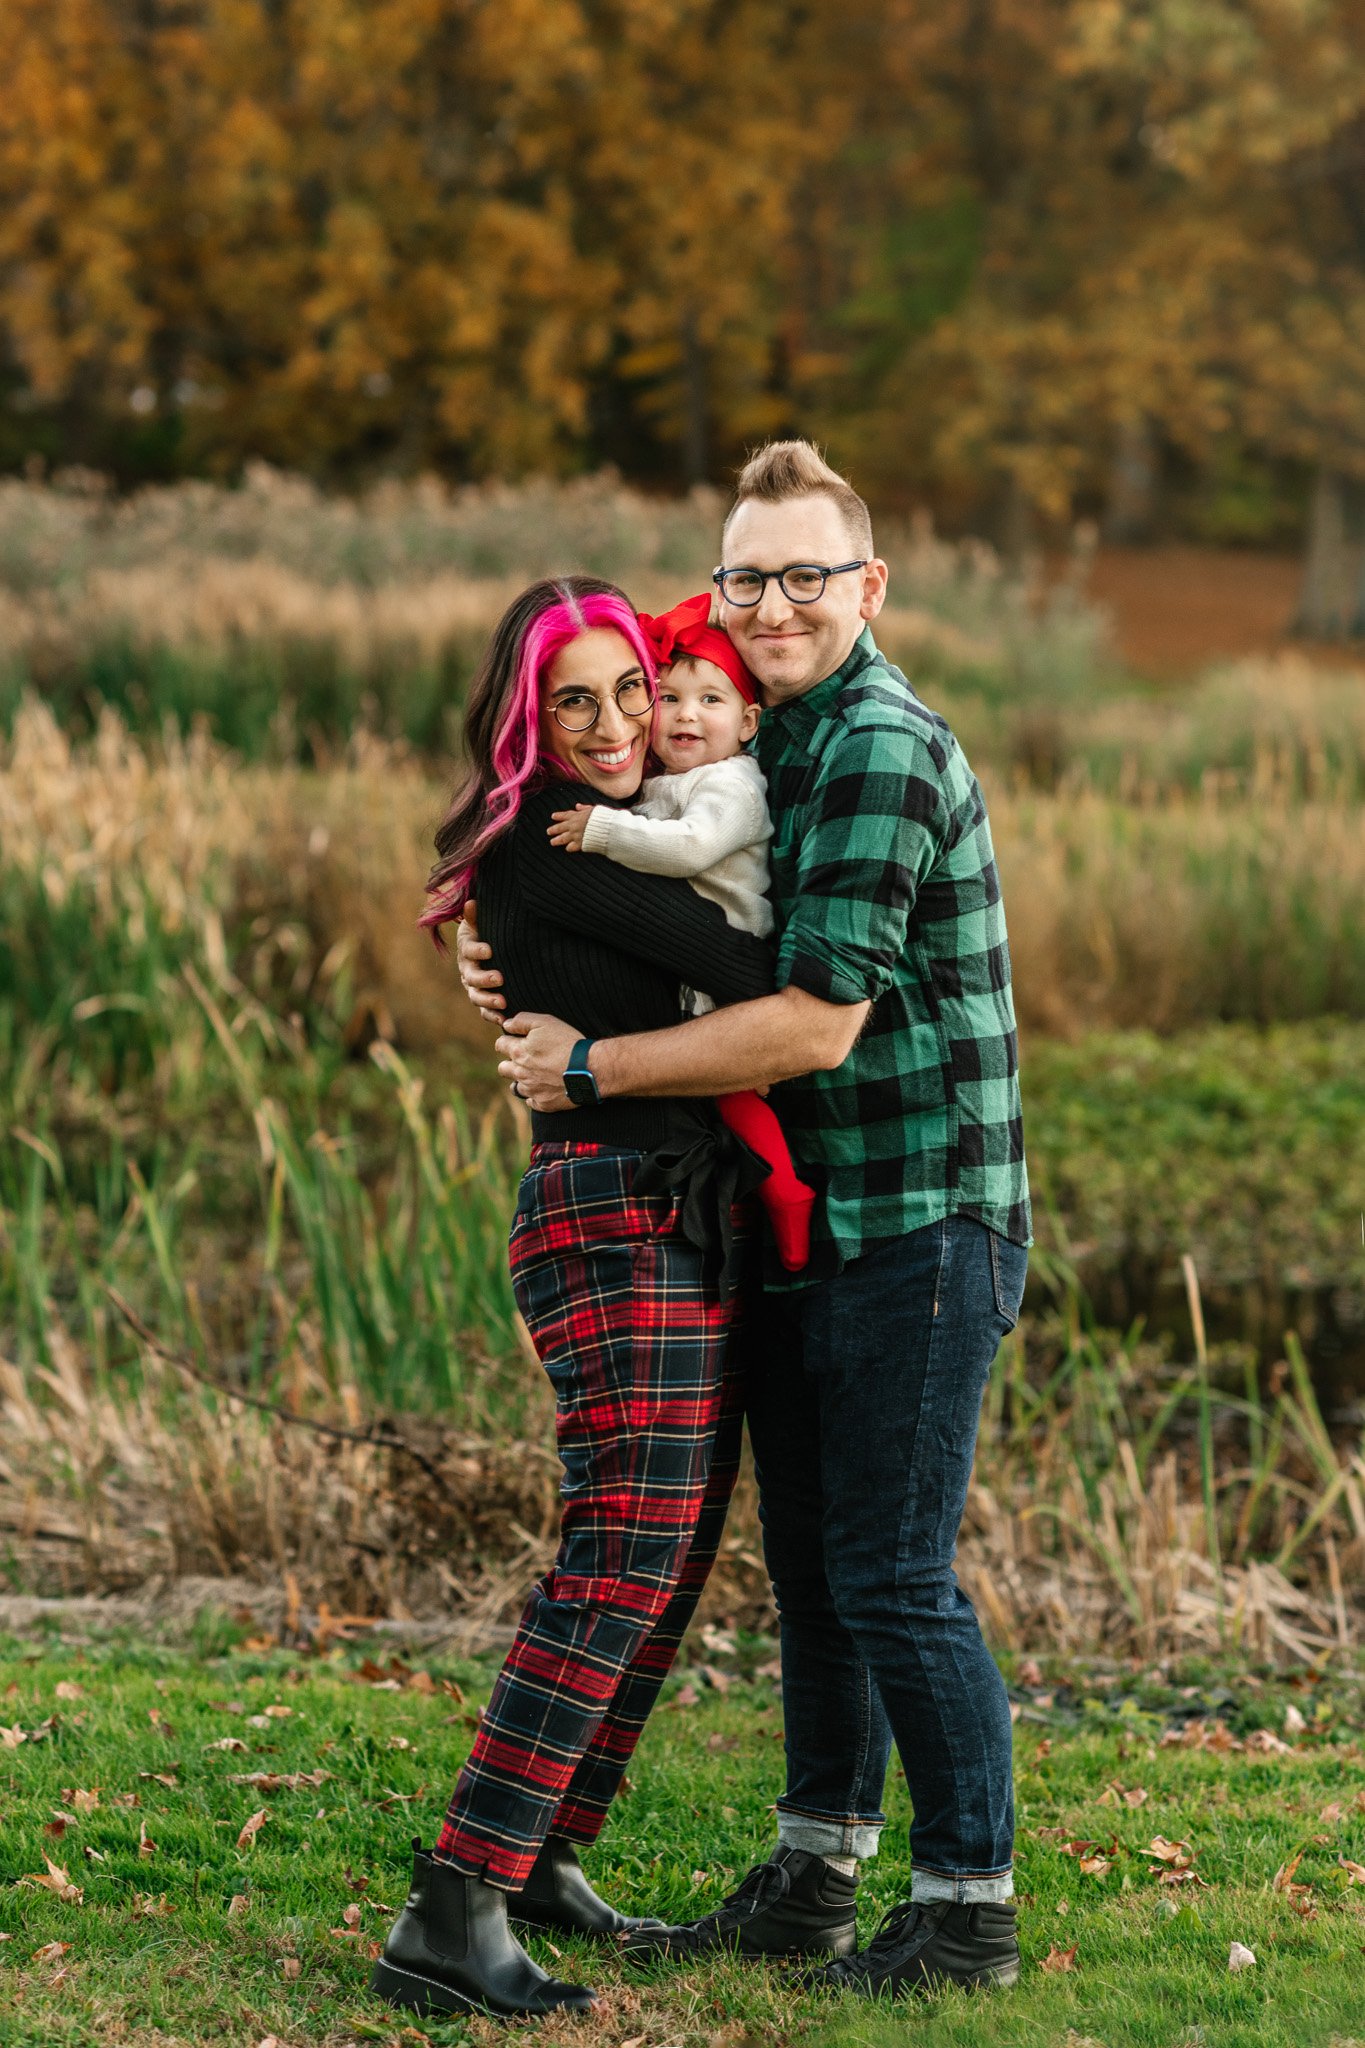  A professional family photographer captures a family hugging while wearing plaids by Nicole Hawkins Photography. family hug pose #NicoleHawkinsPhotography #NicoleHawkinsFamily #fallfamilyphotos #fallphotos #familyphotographerNJ #NJfallfamilypics 